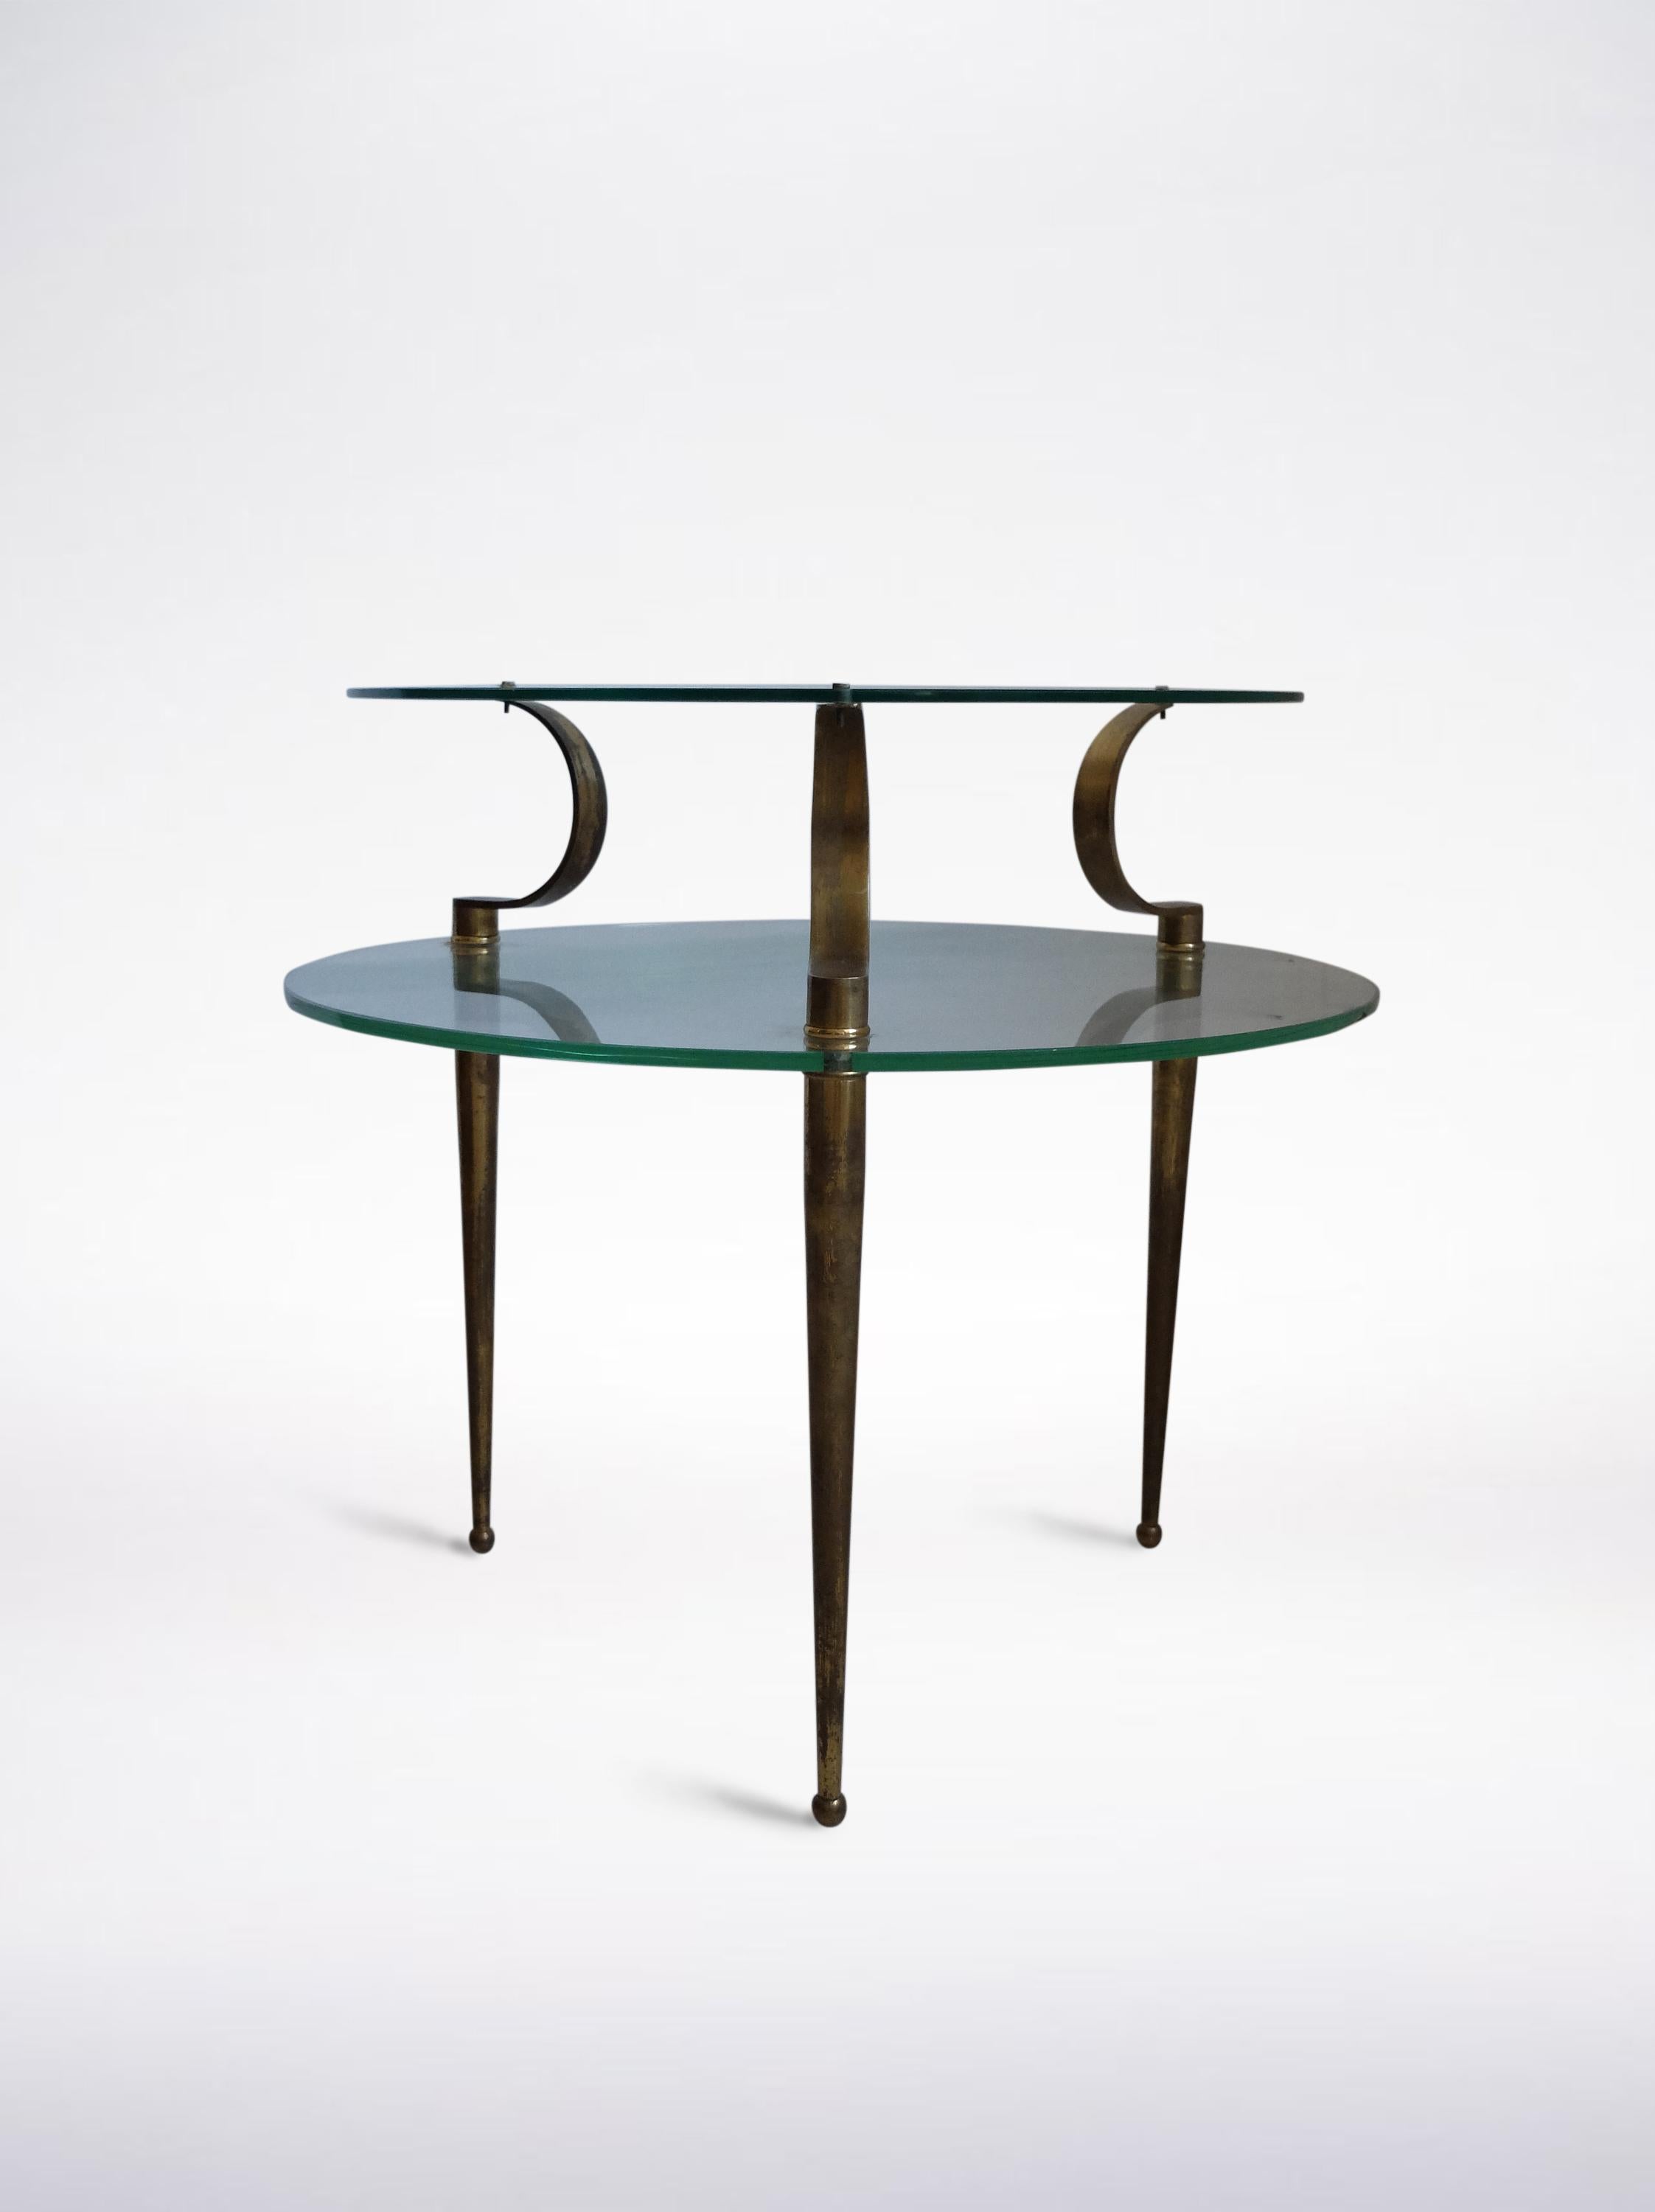 Pietro Chiesa for Fontana Arte, Italian Mid-Century Modern glass and brass coffee table, 1940 ca.
Elegant Mid-Century Fontana Arte round coffee table from the 40s.
The table holds its structure well and has an aged patina on the brass legs.
It